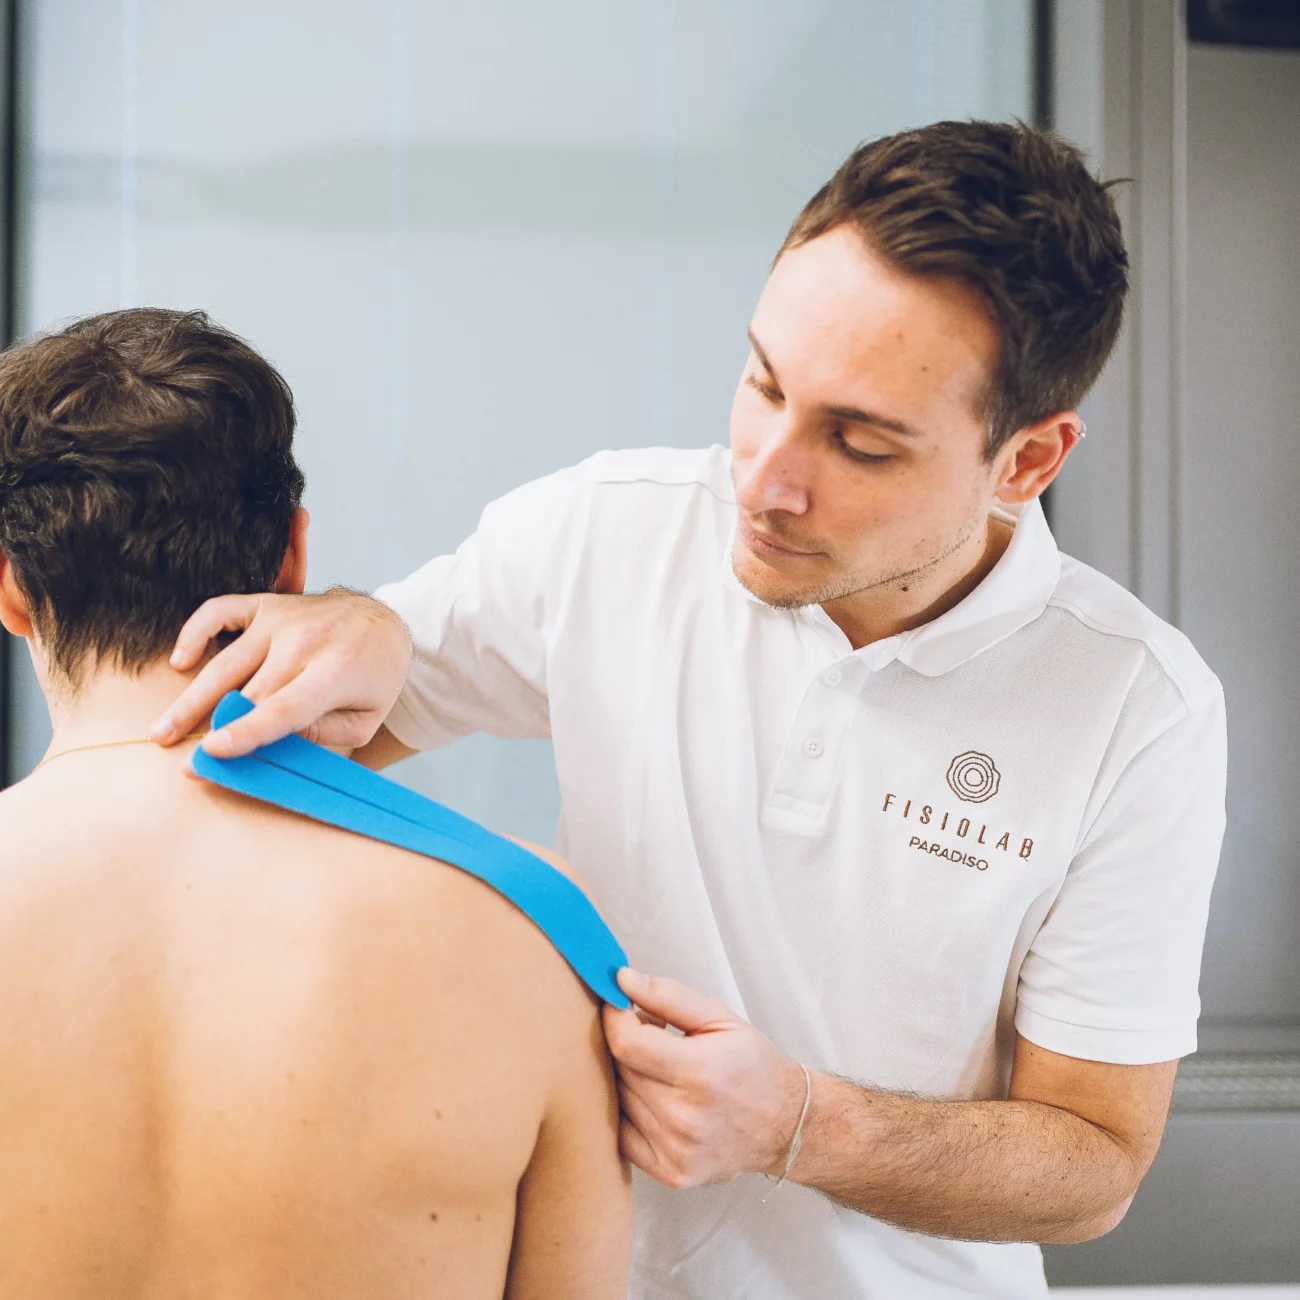 Physiotherapy and rehabilitation in the Lugano area